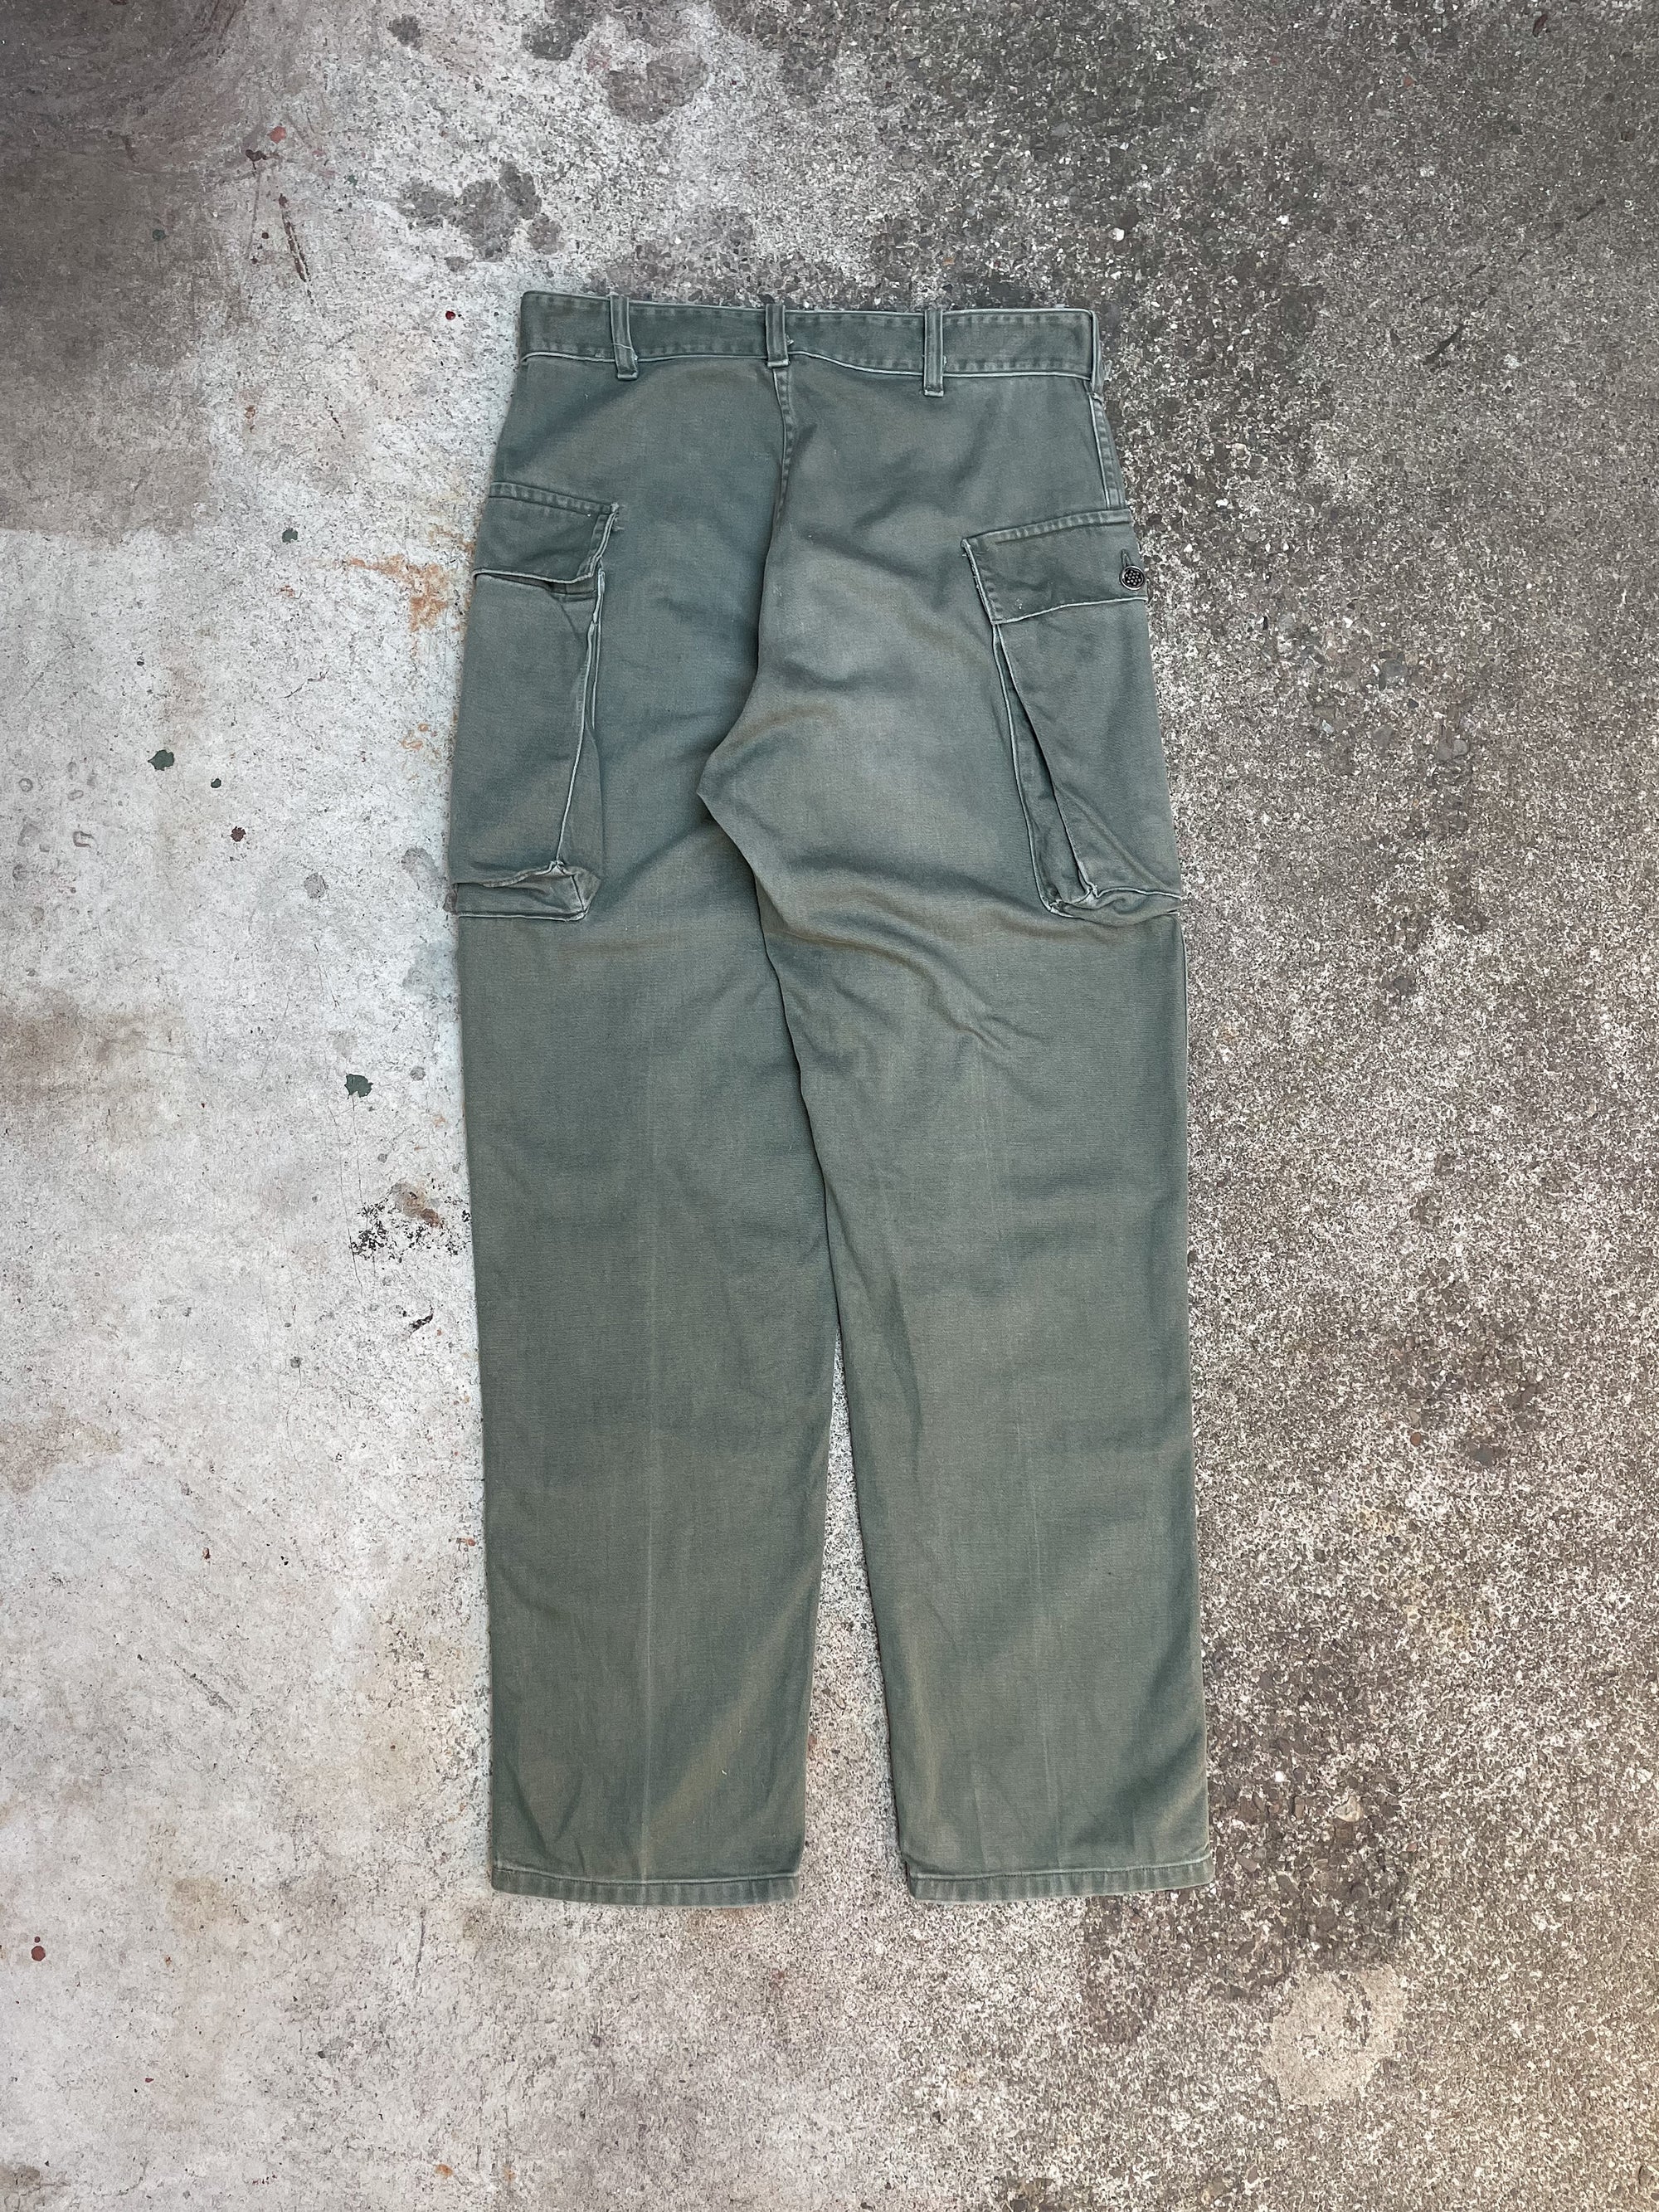 1950s Faded 13-Star Military Cargo Field Pants (28X29)